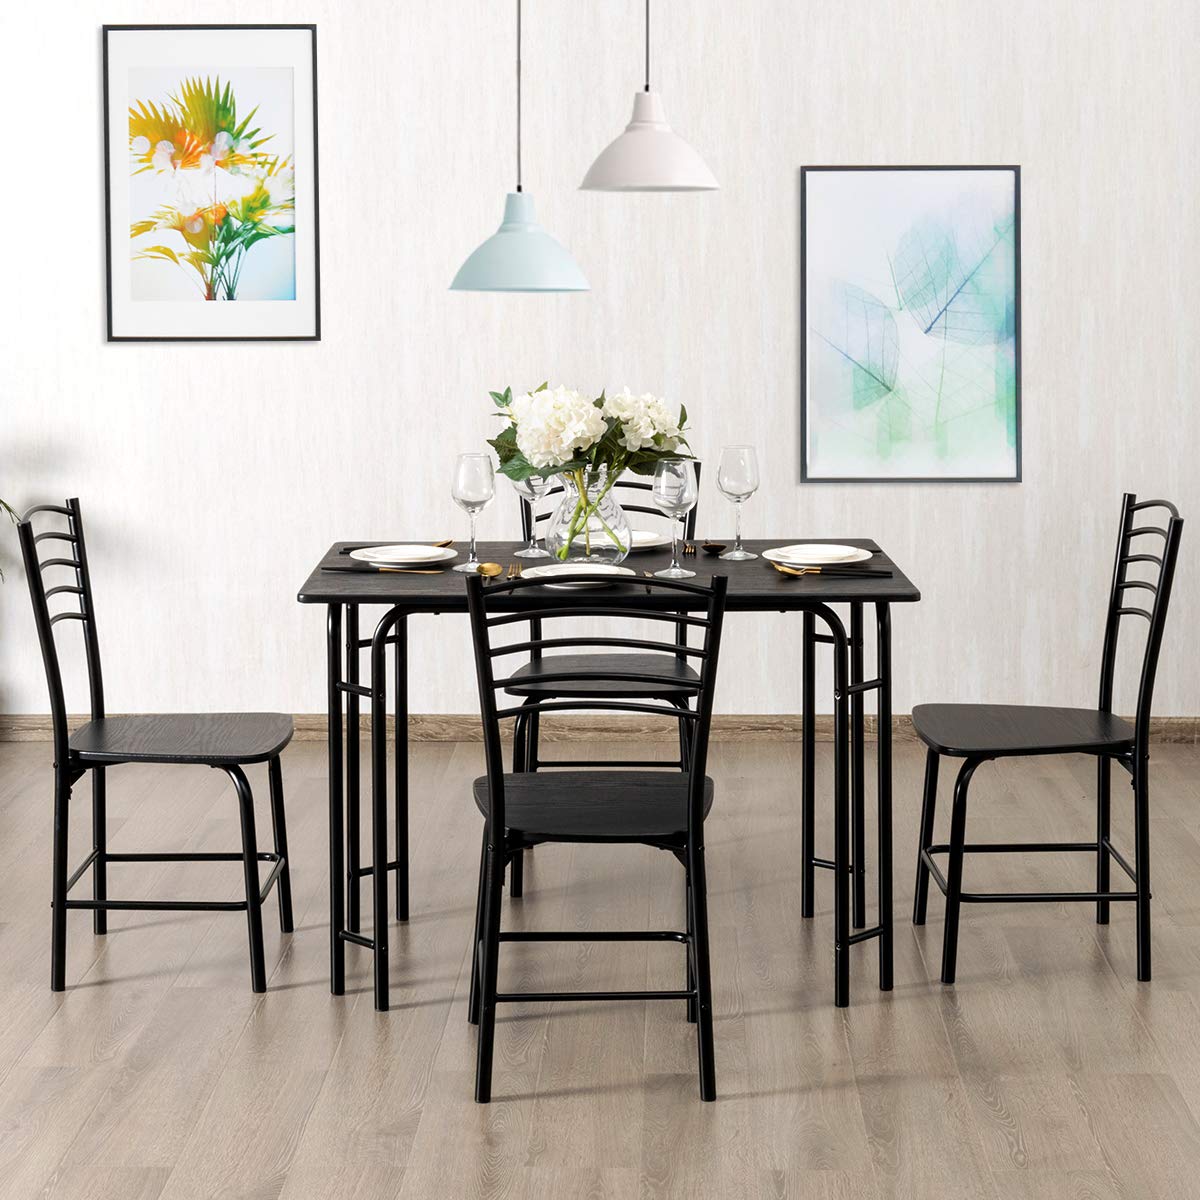 Giantex 5 PCS Dining Table Set 4 Person Modern Kitchen Table and 4 Chairs